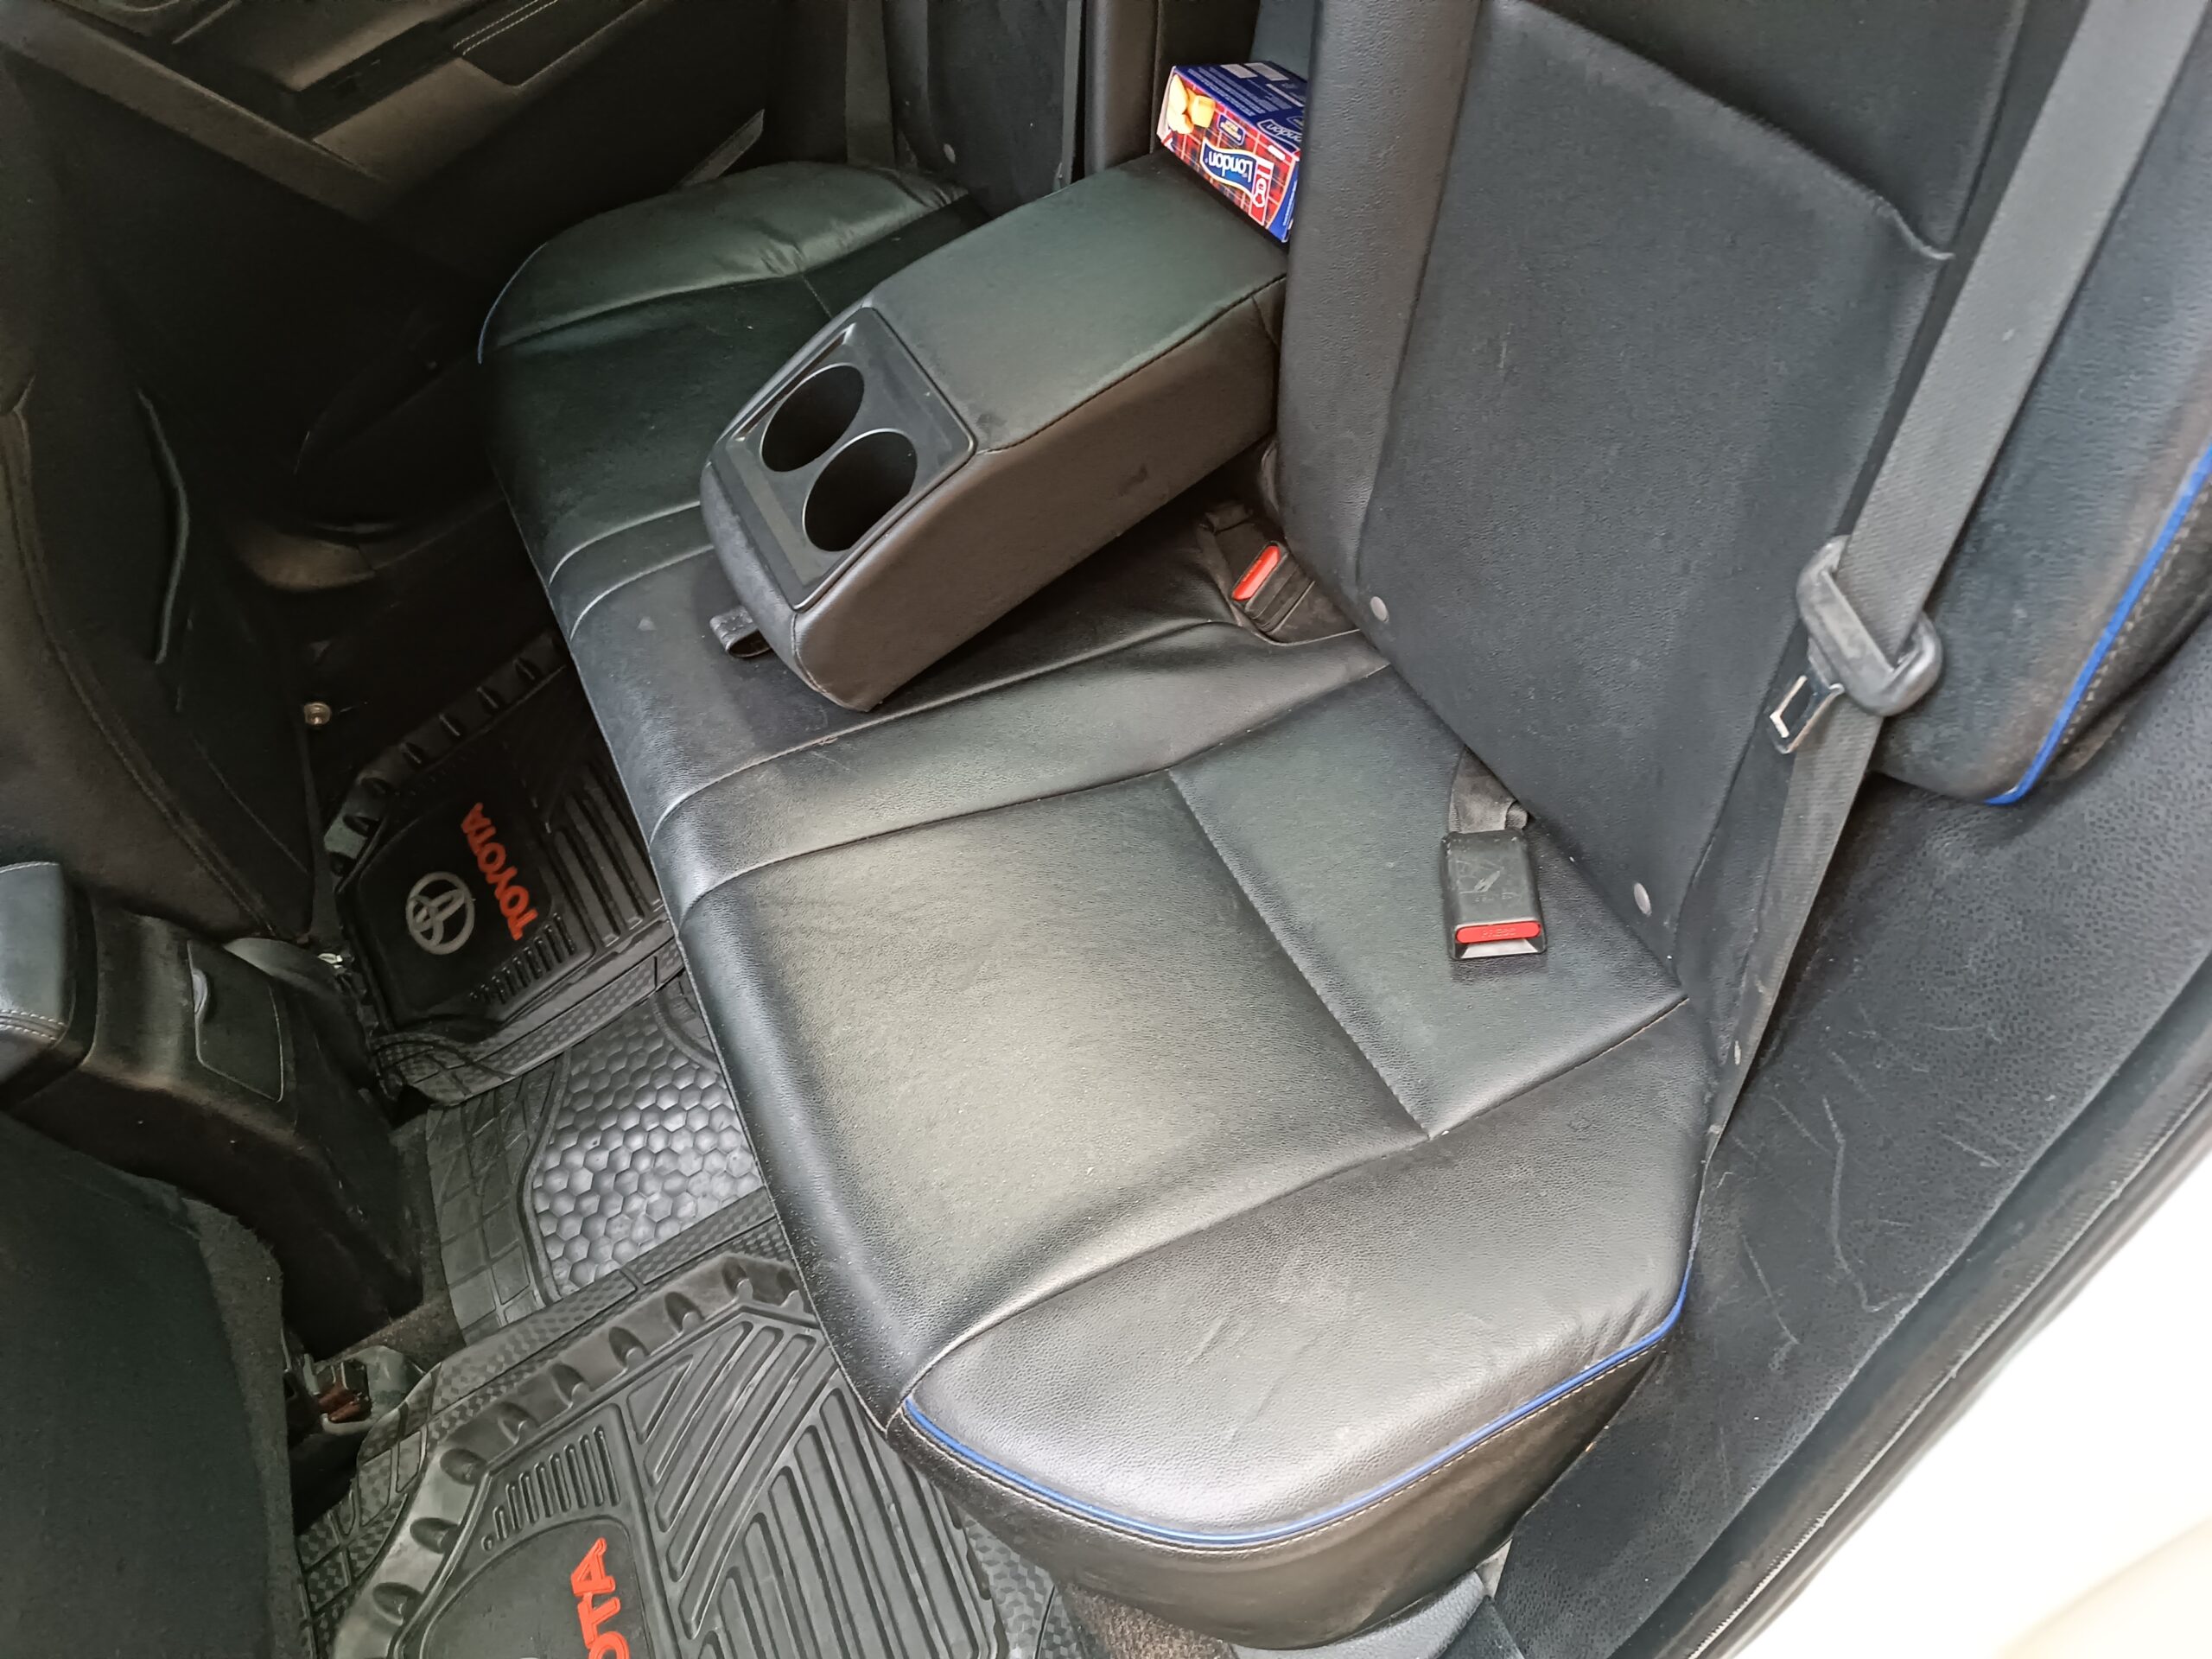 Original seat leather view of the Toyota Corolla 2017